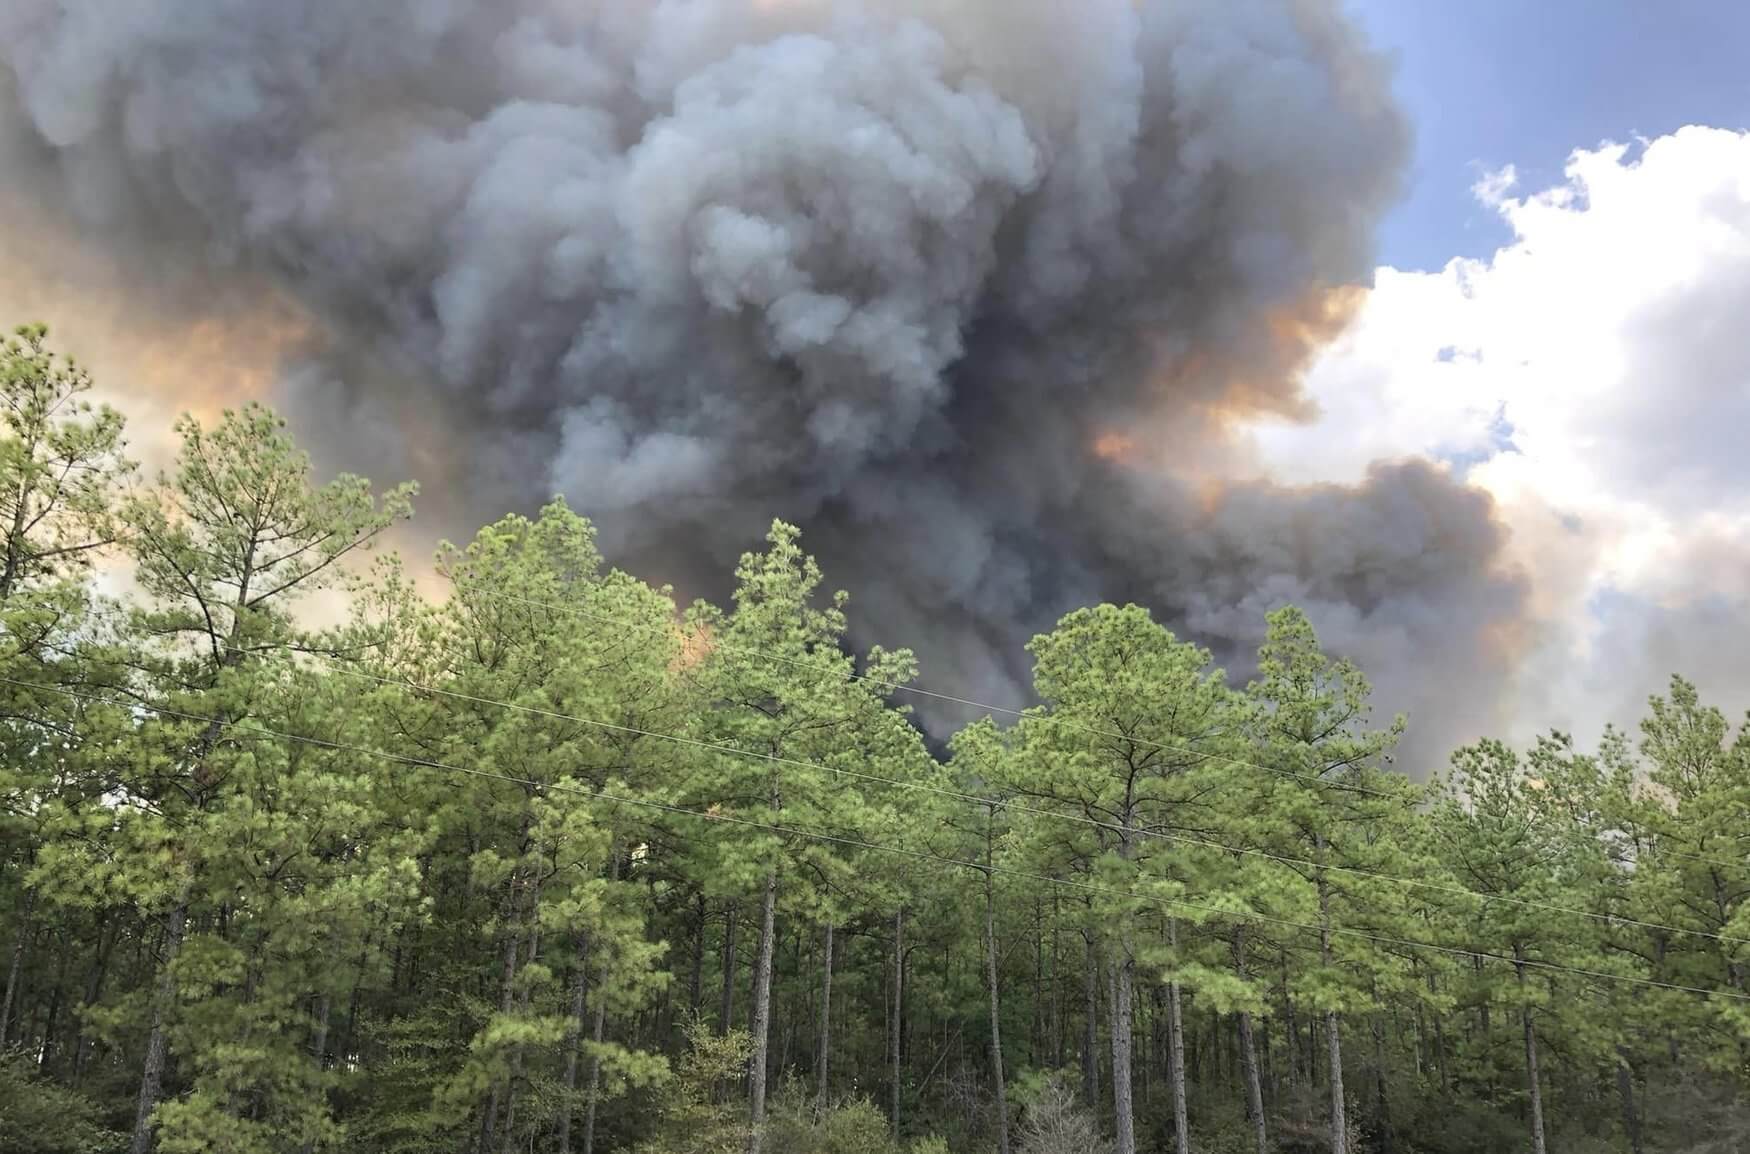 The Game Preserve Fire in Walker County near Huntsville grew rapidly to 4,254 acres.